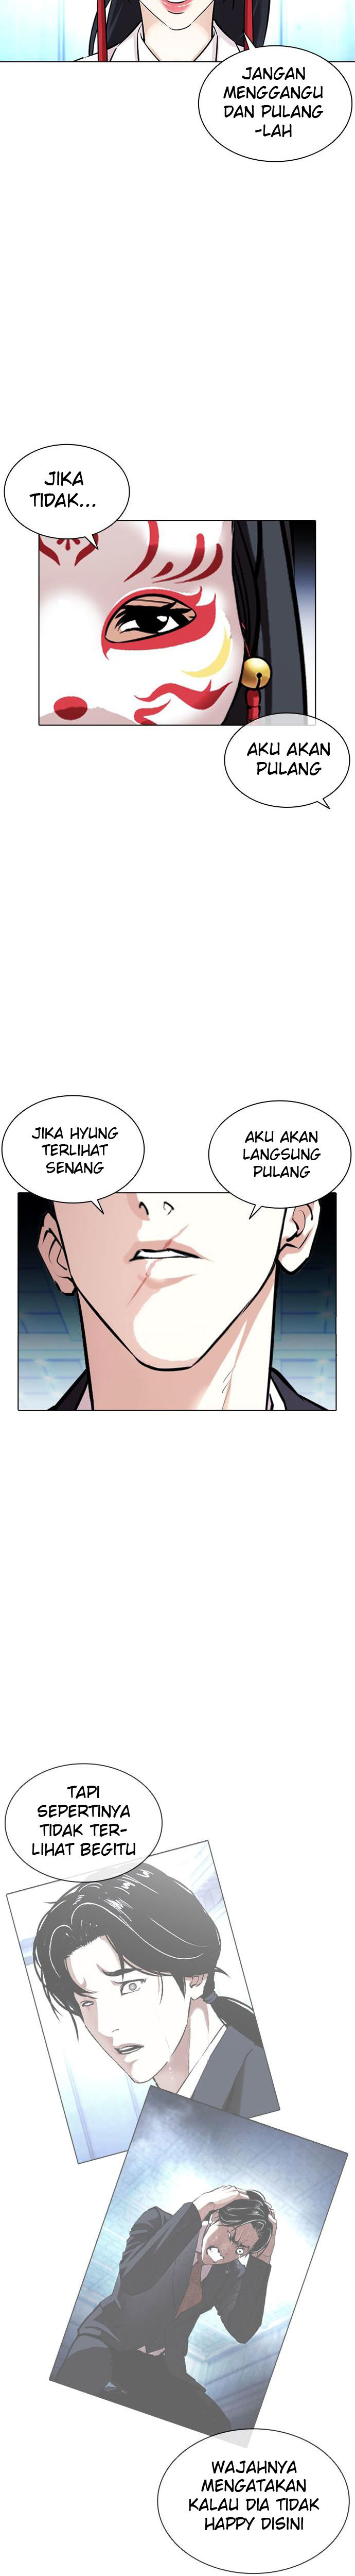 Lookism Chapter 384 Image 26